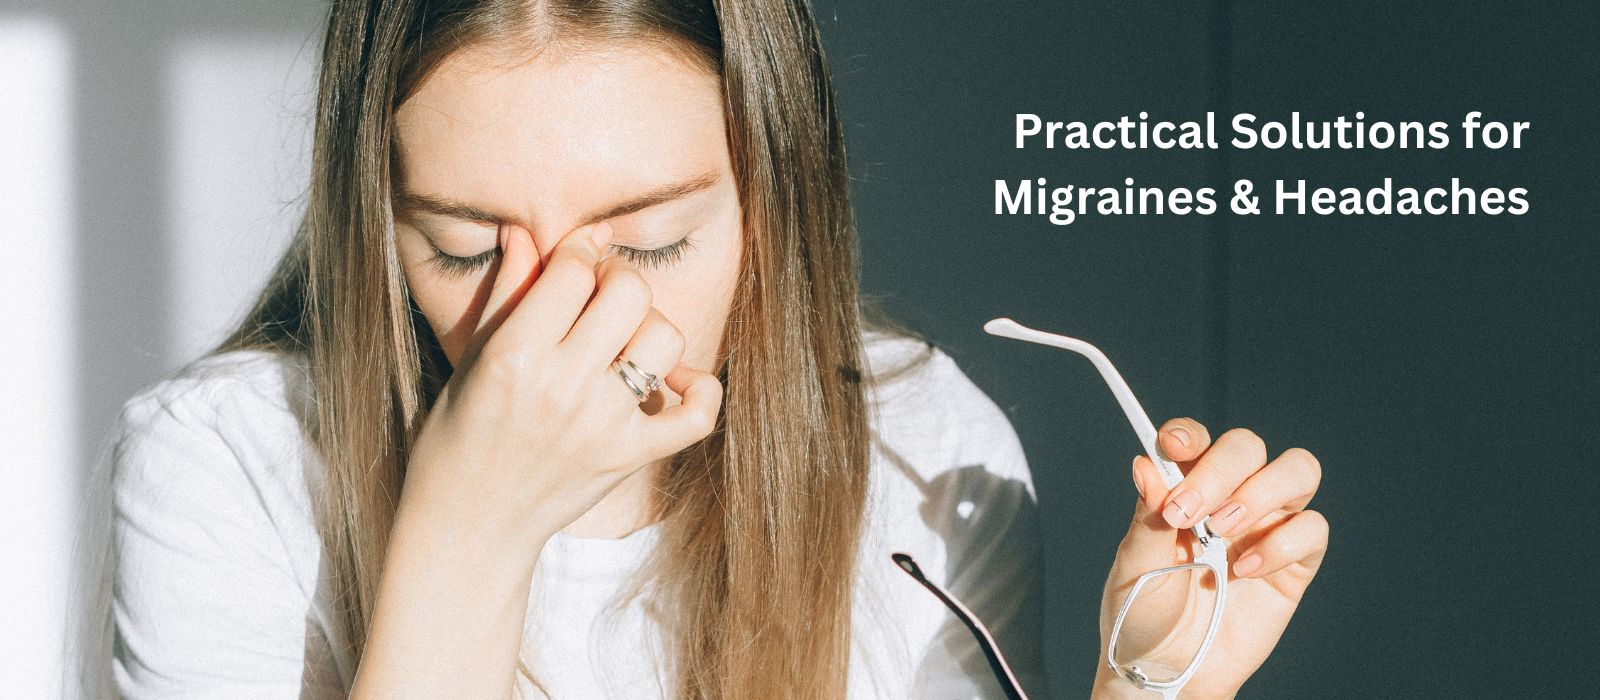 migraine and headache pain relief solutions